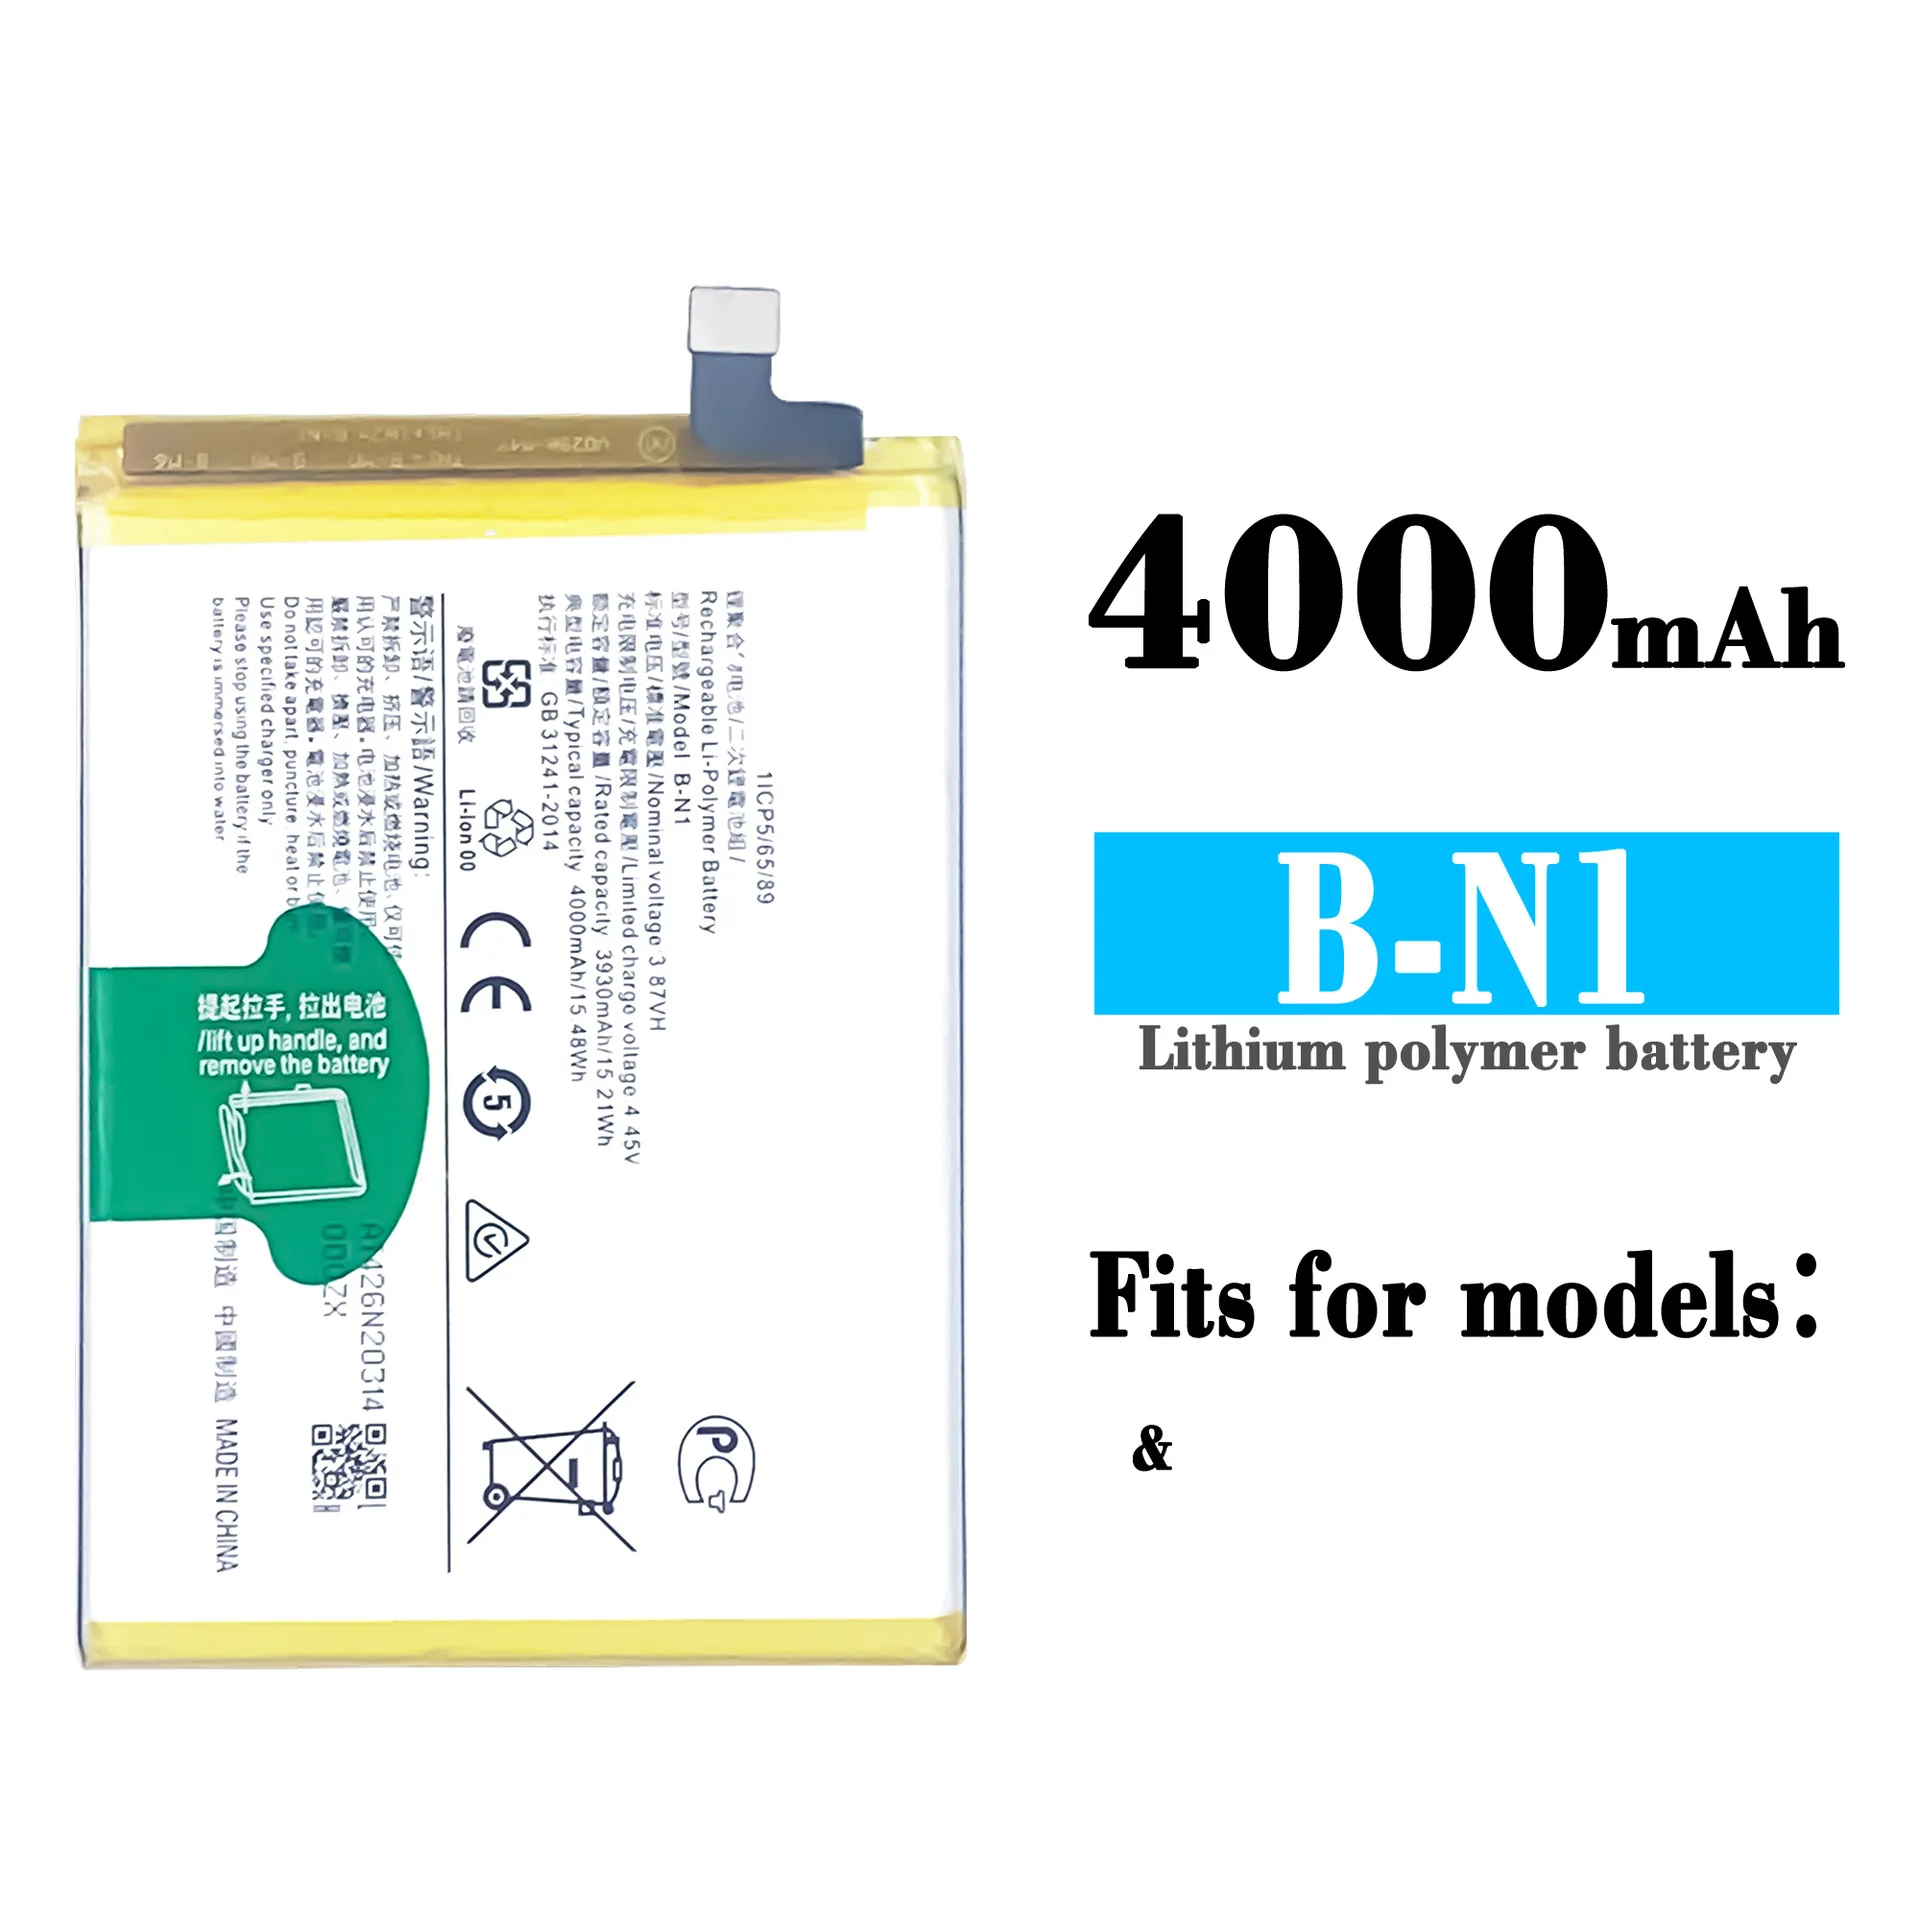 

100% Orginal High Quality Replacement Battery For VIVO B-N1 4000mAh New Built-in Large Capacity Lithium Batteries